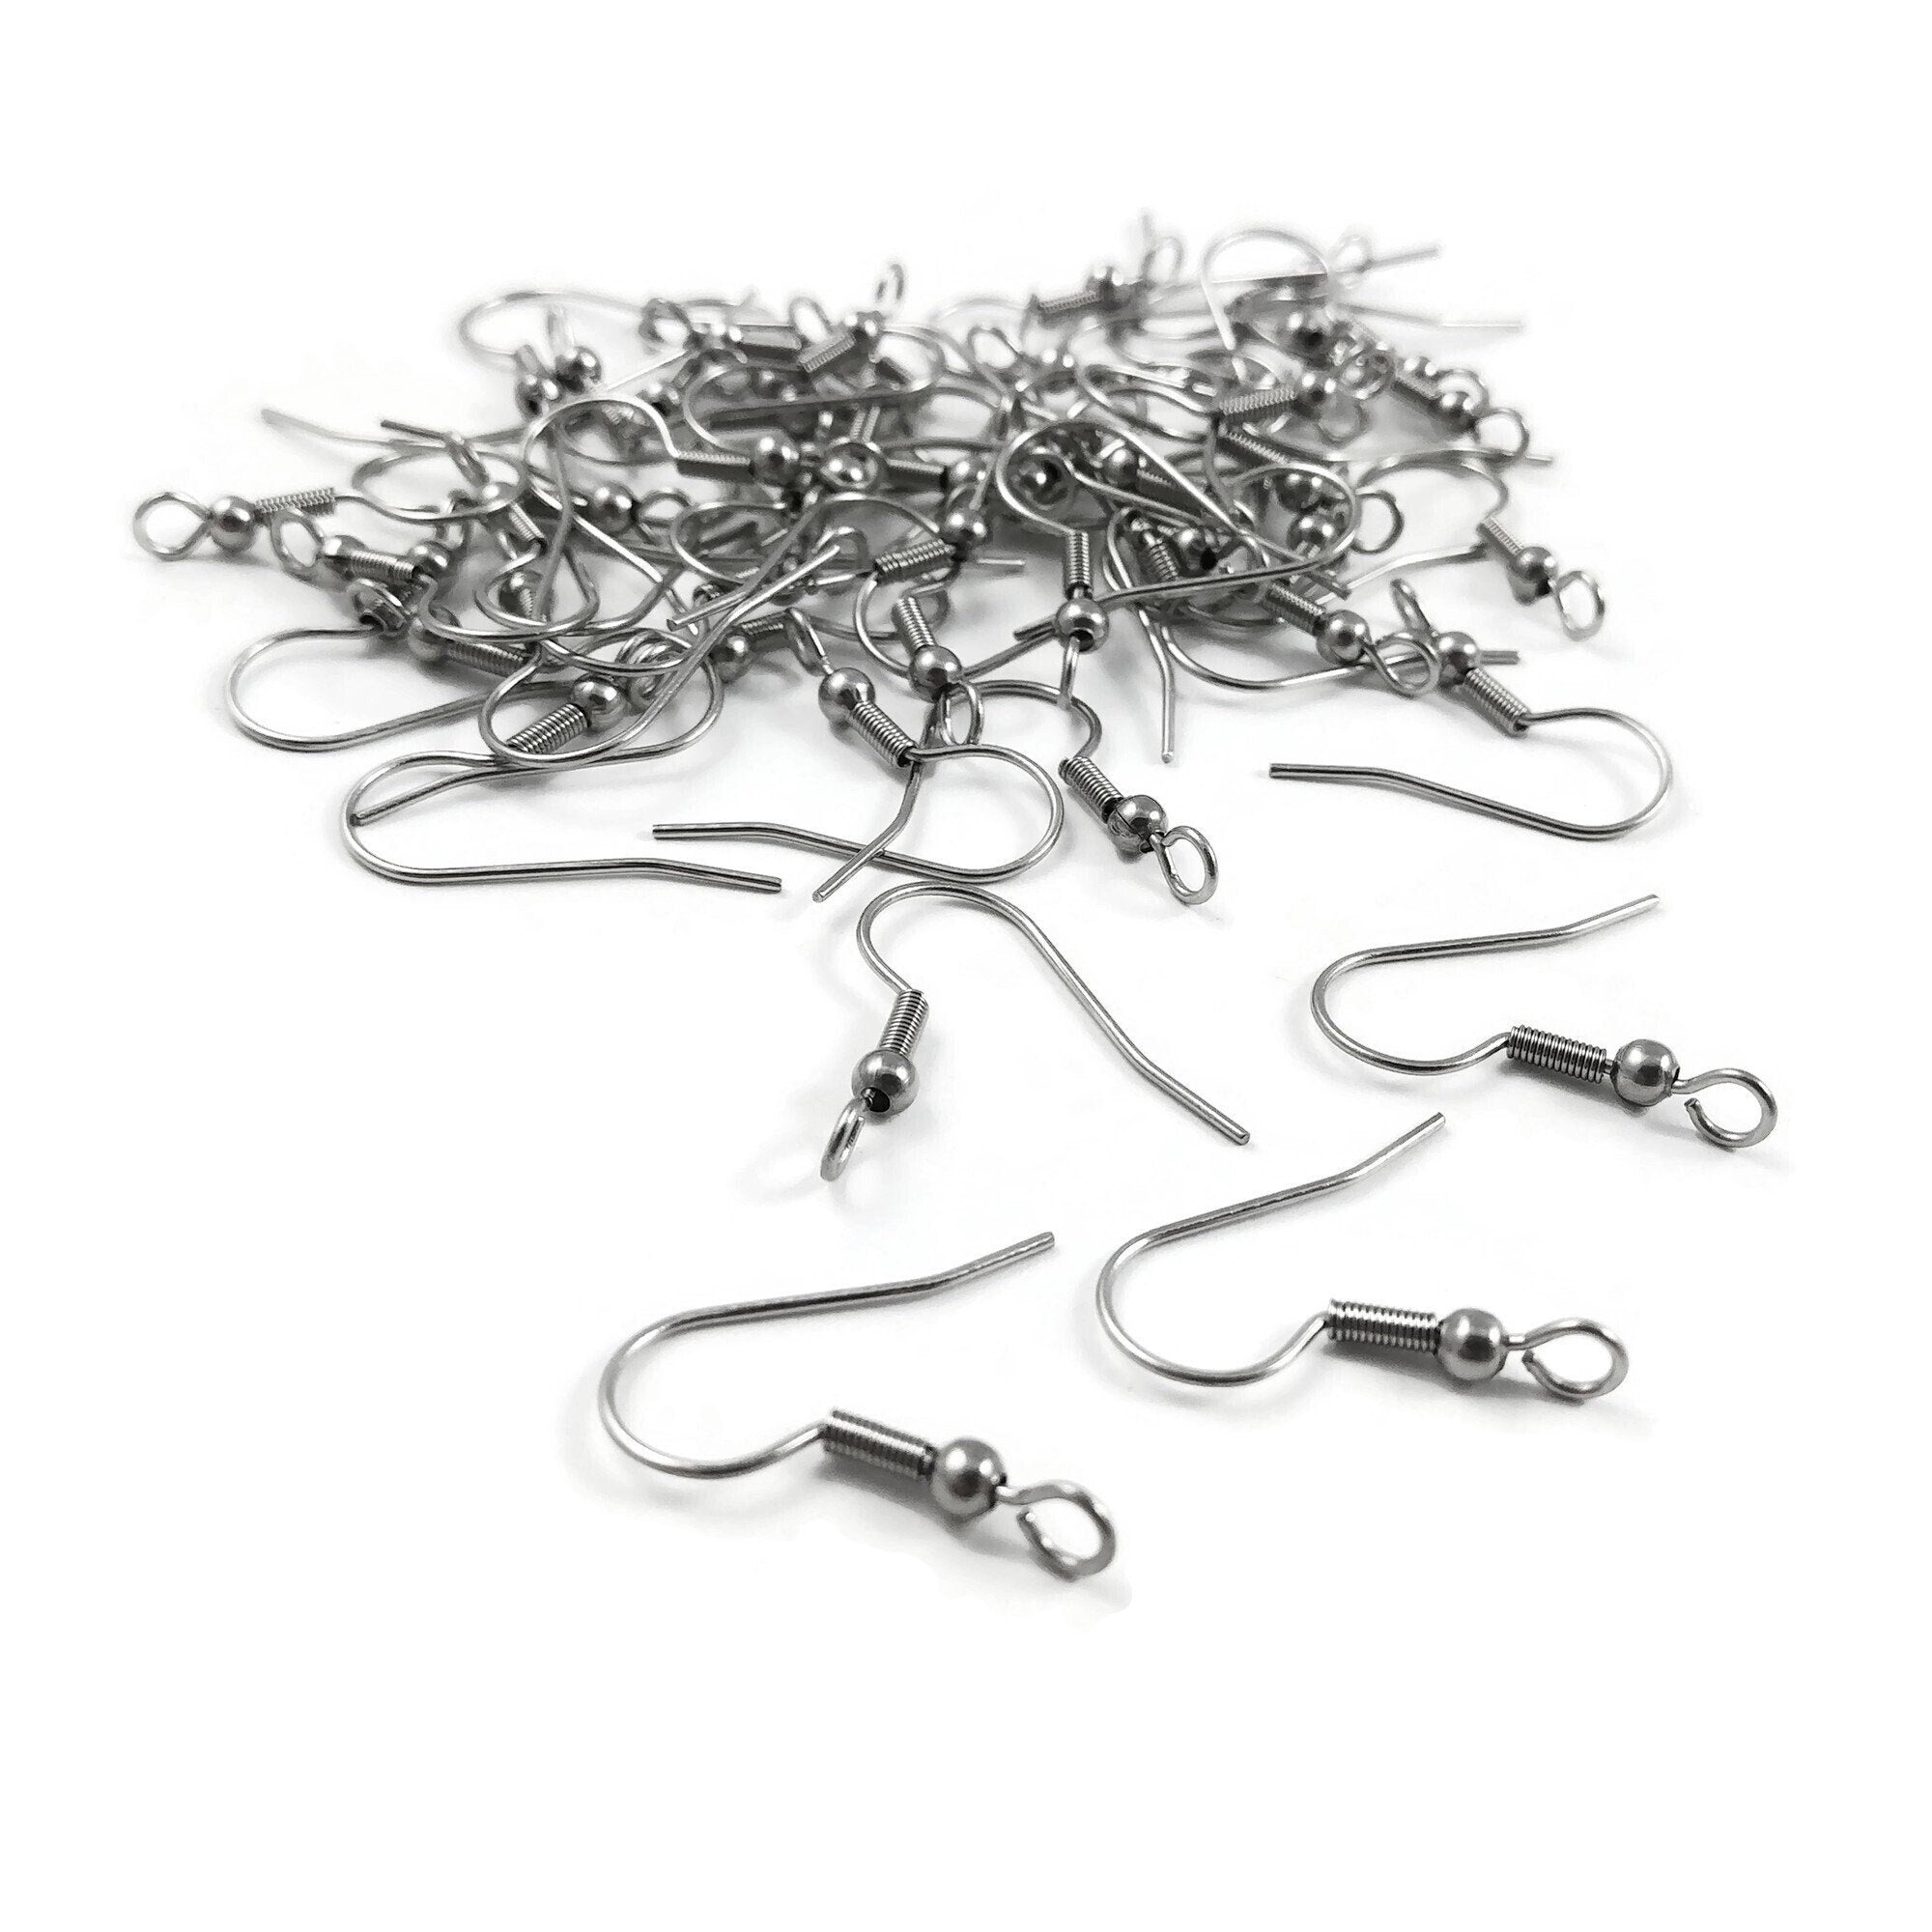 Buy Earring Hooks Silver Plated, Earwire Jewelry Making Findings, 25  Pairs